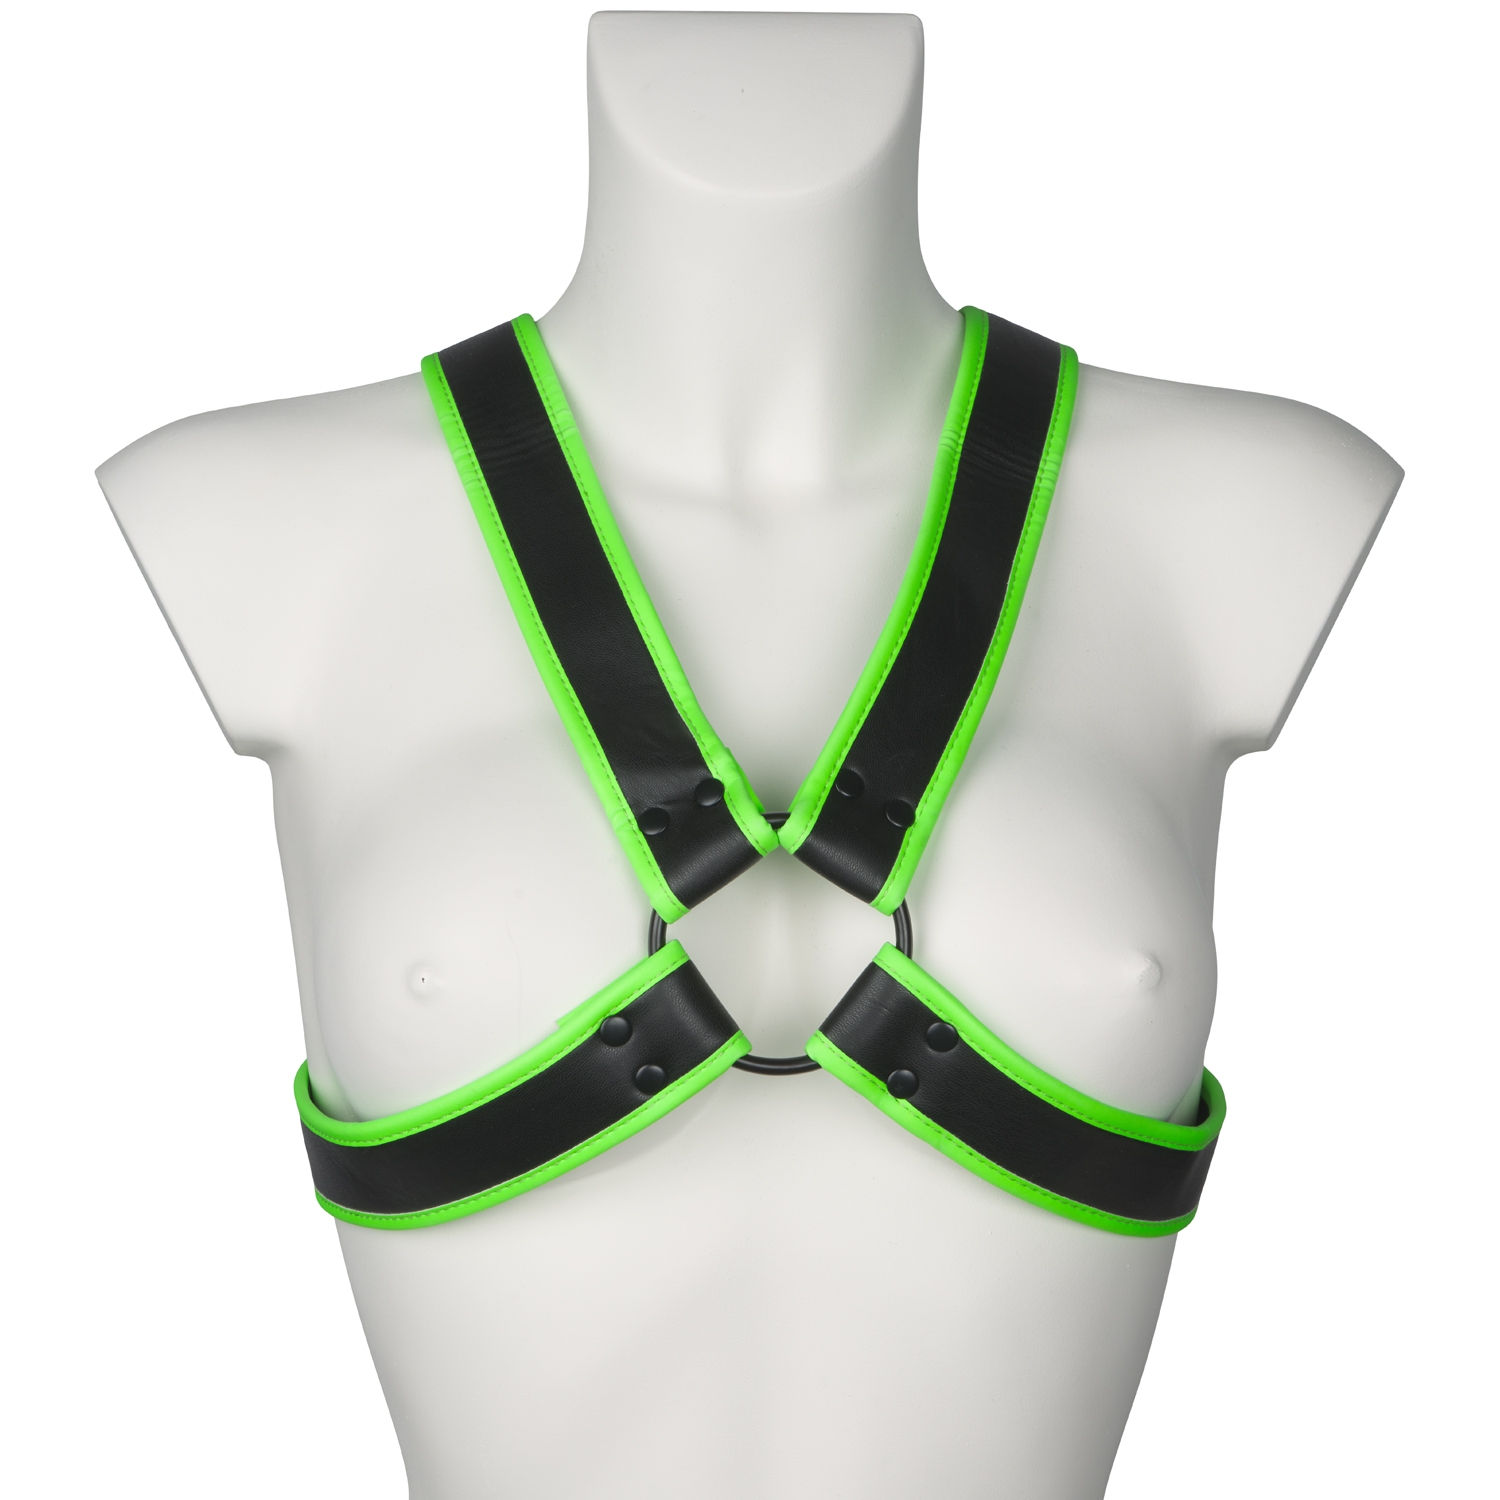 Ouch! Glow in the Dark Cross Bryst Harness - Black - S/M thumbnail